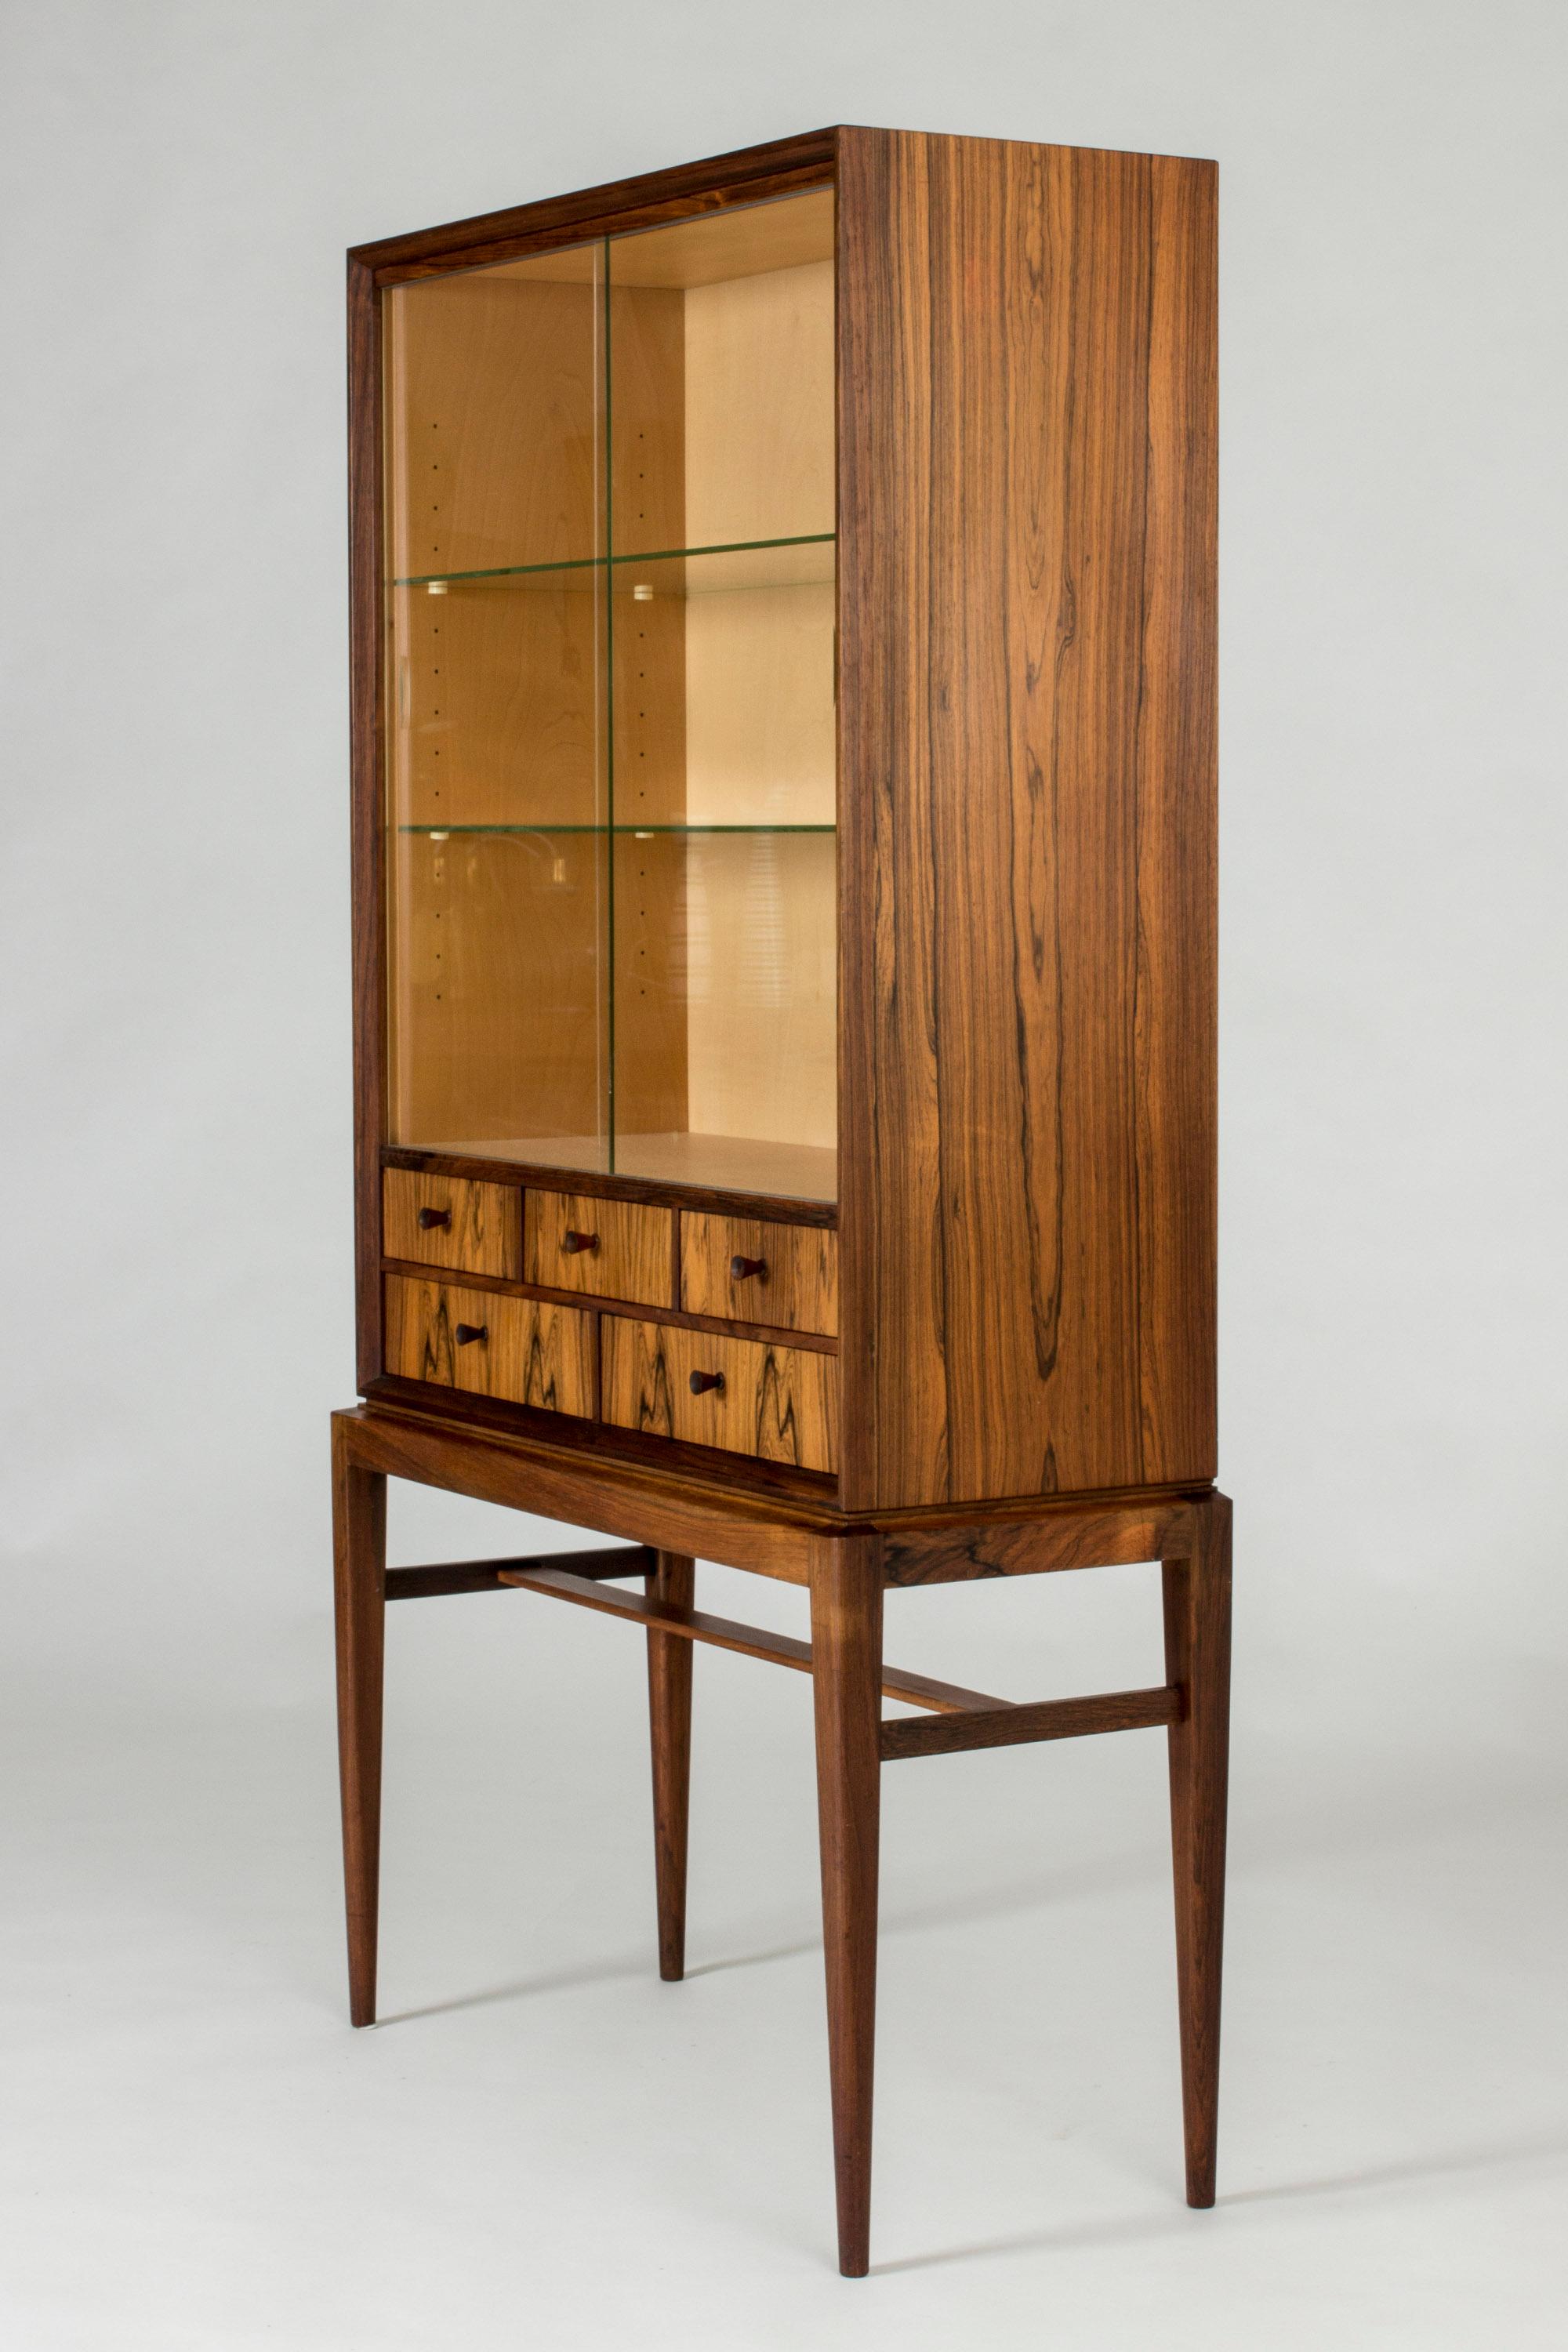 Midcentury Rosewood and Glass Vitrine Cabinet by Svante Skogh for Seffle 2